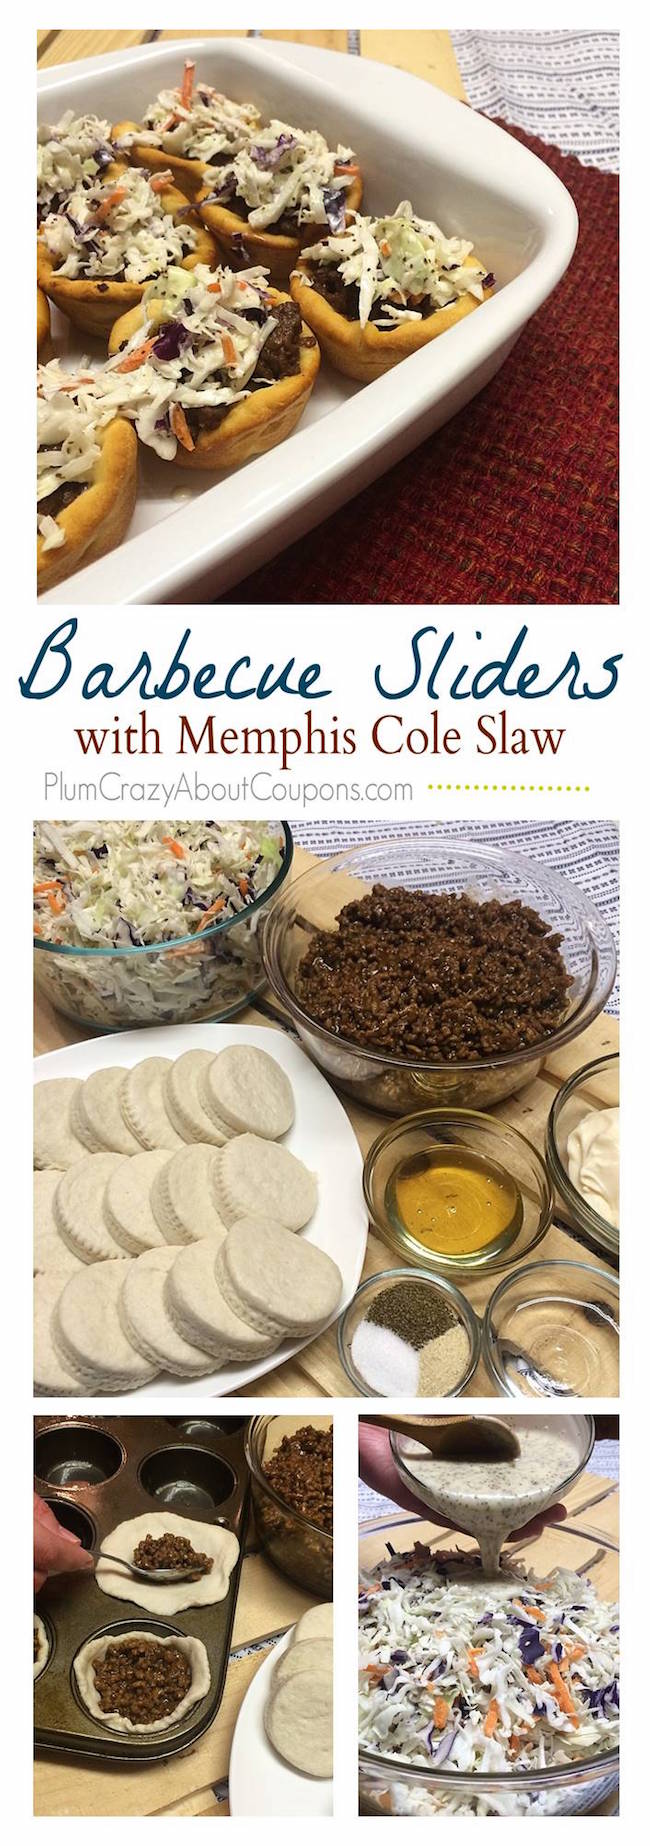 BBQ-Sliders-and-Memphis-Slaw-VERTICAL-7